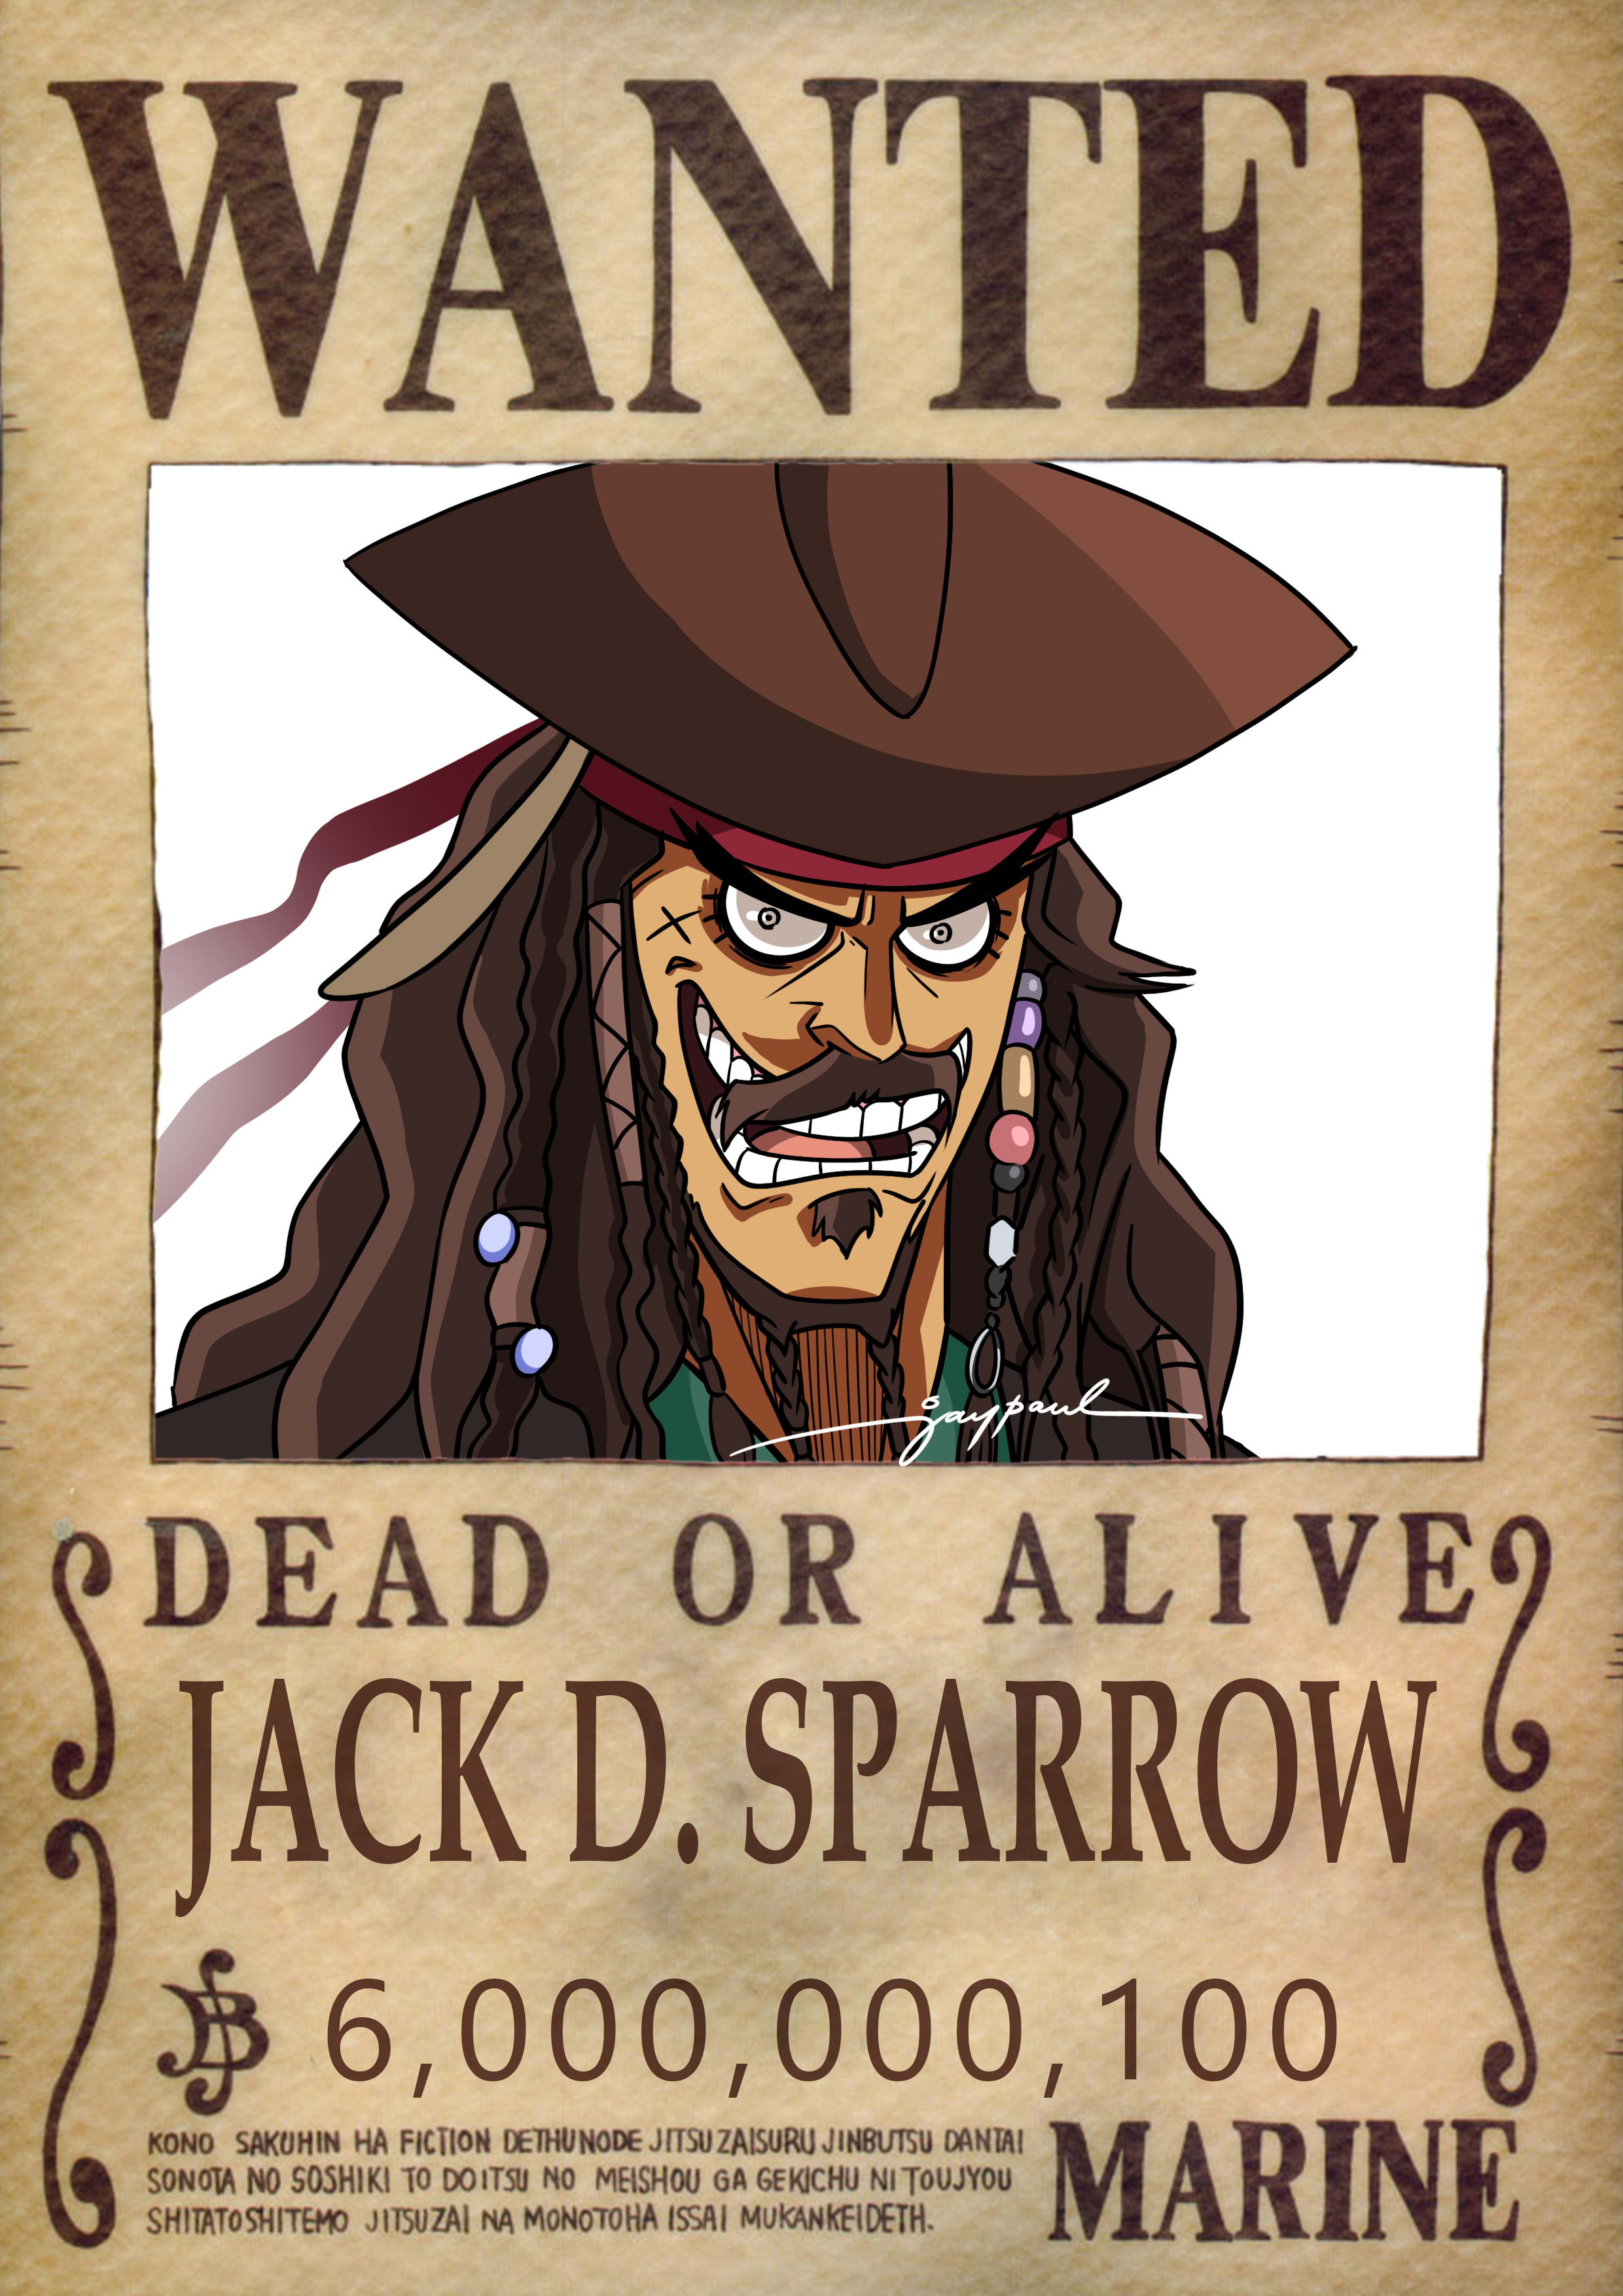 One Piece Anime Bounty Wanted Poster Of 10 Straw Hat Members (Premium  Quality No Blurred Image) Luffy Straw Hat Pirate crew Wanted Poster Set